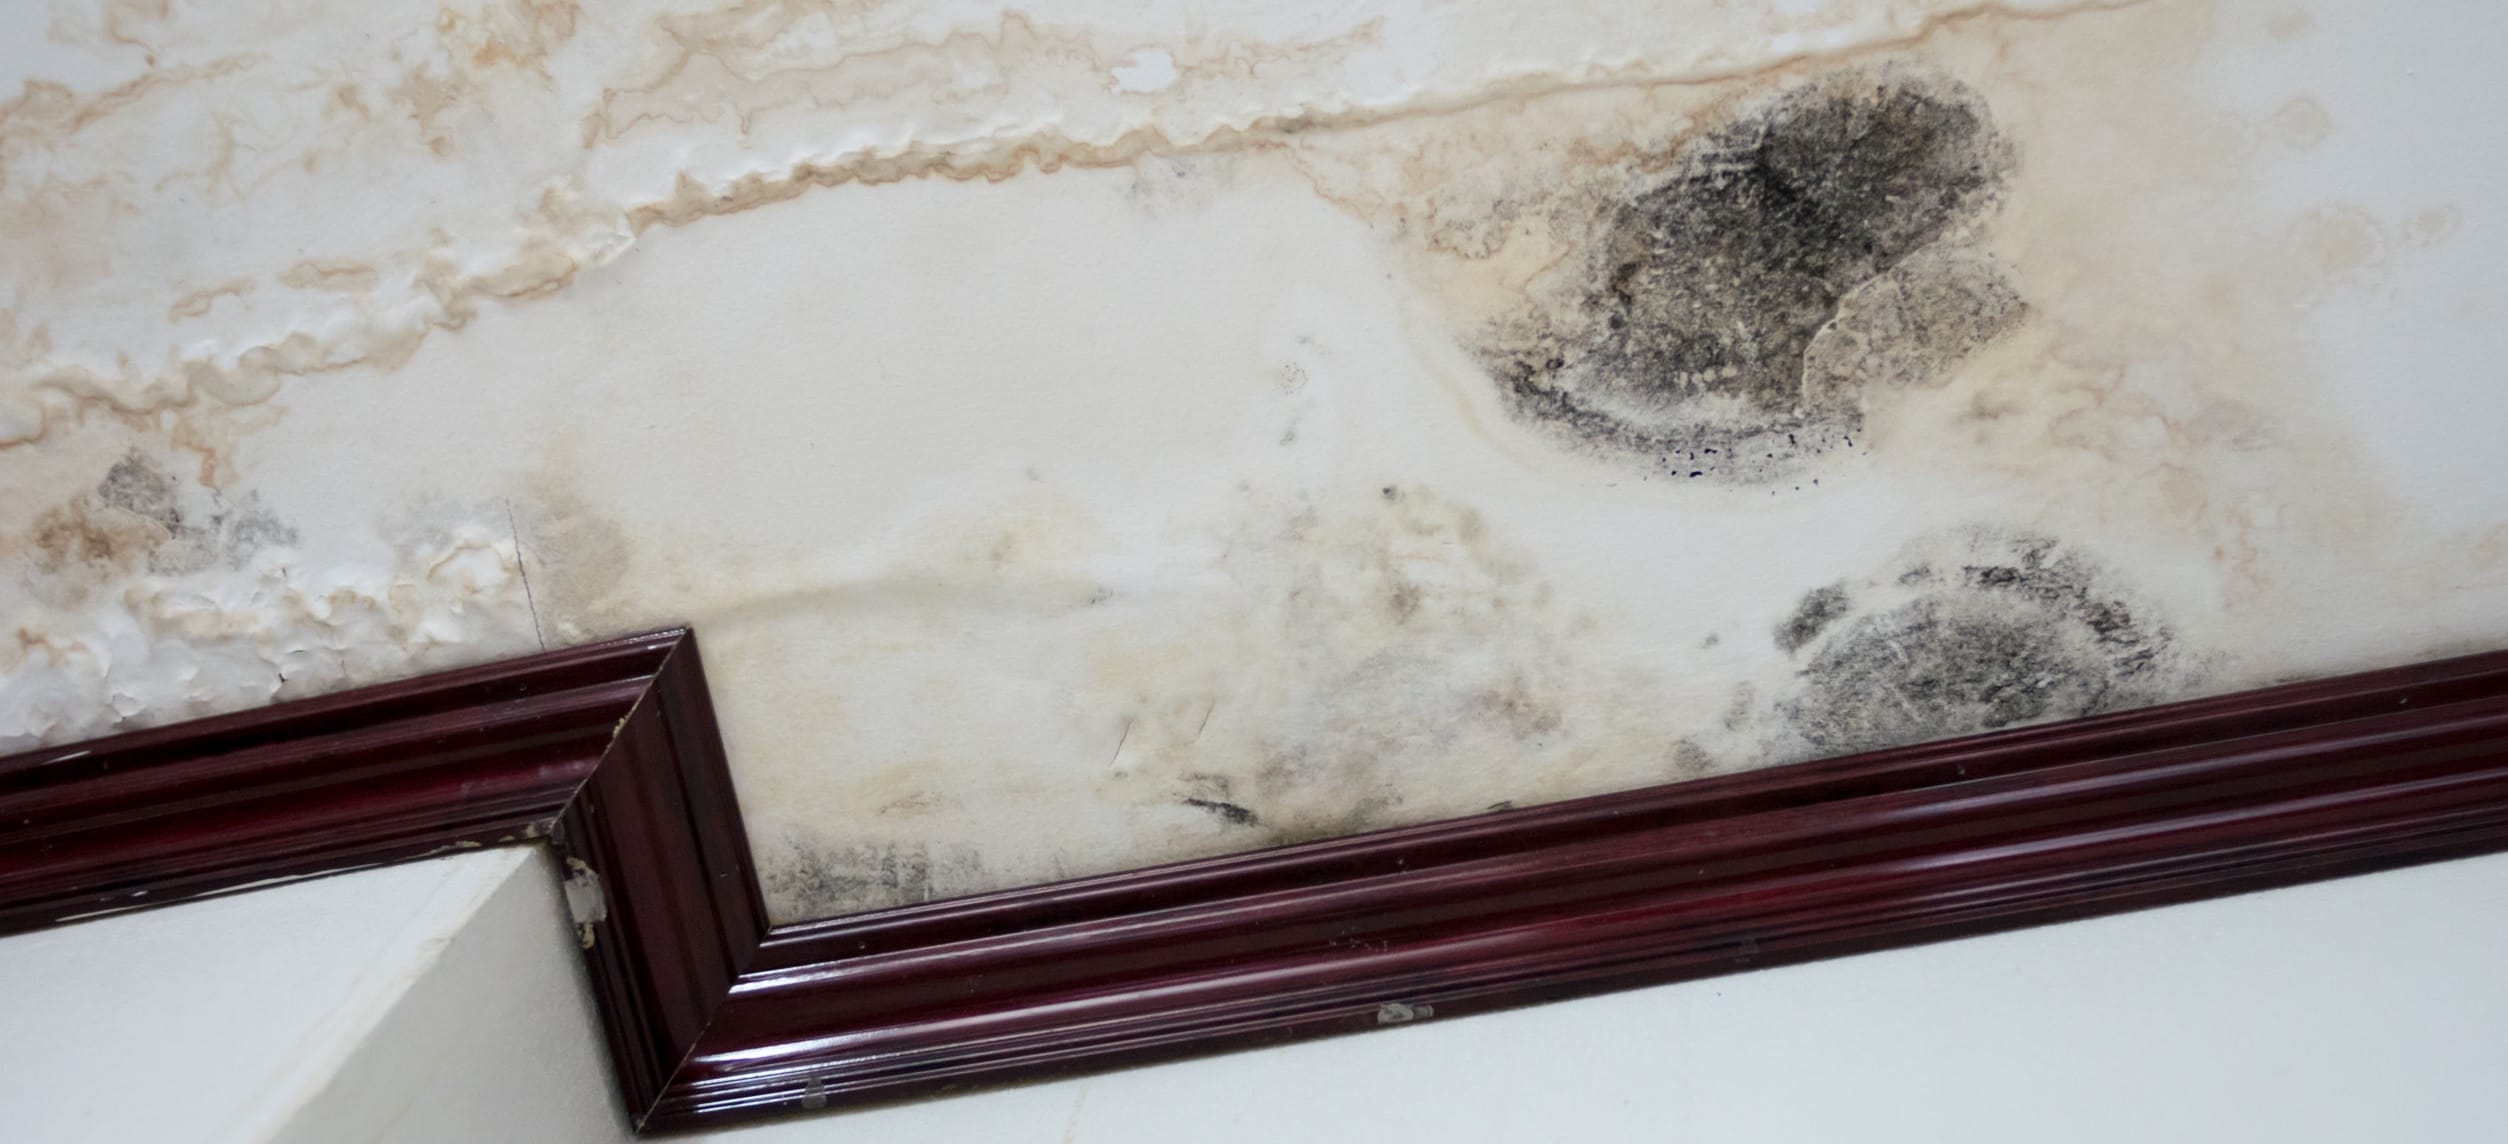 Damage caused by water leakage on a wall and ceiling